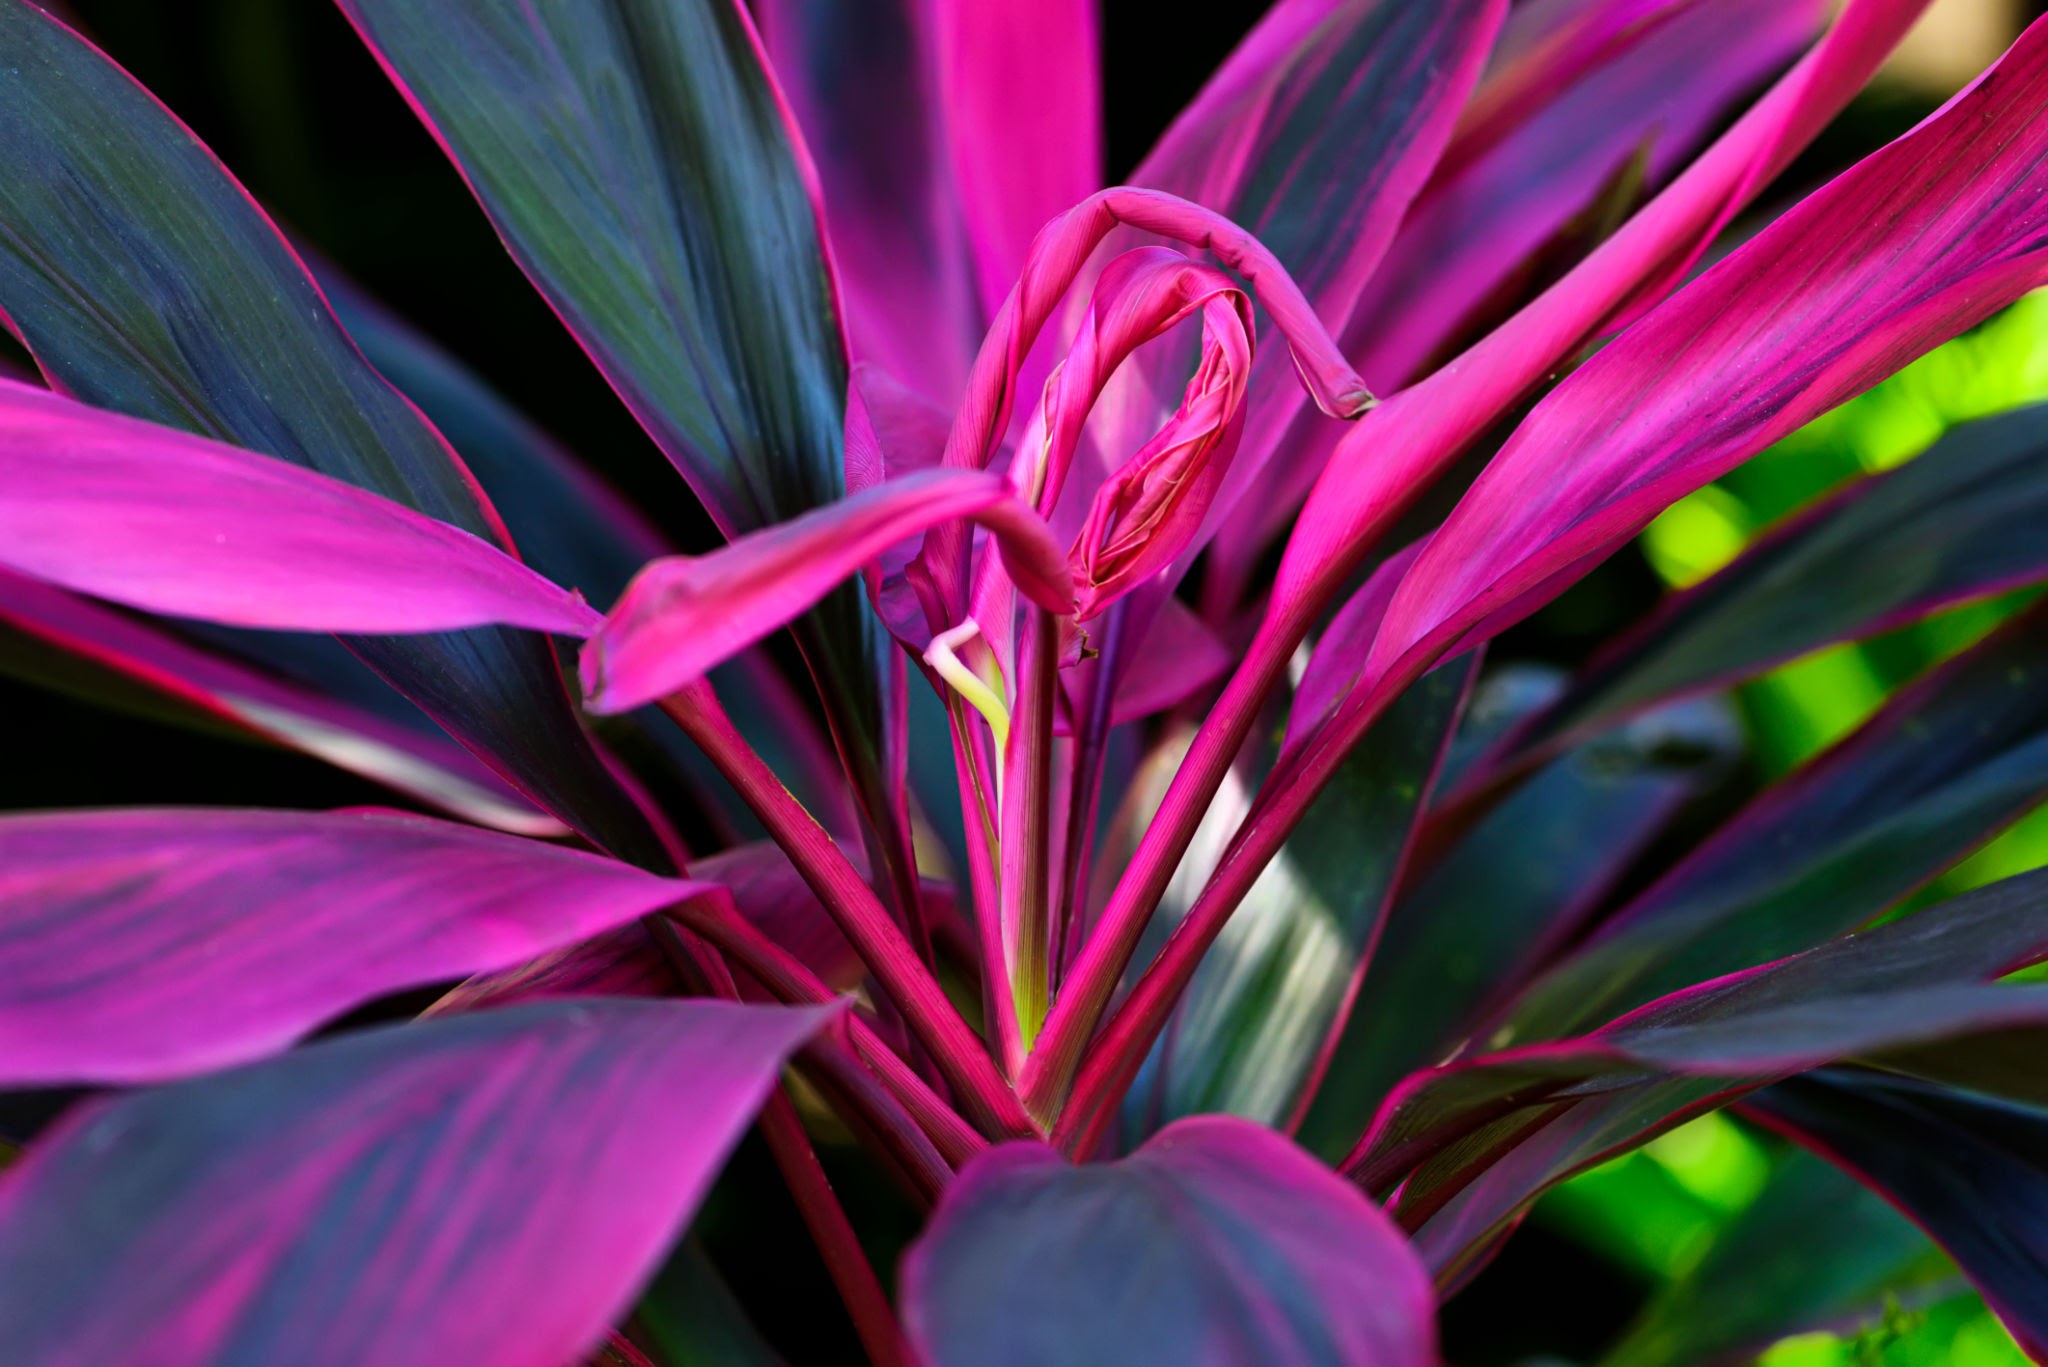 Overview of Cordylines